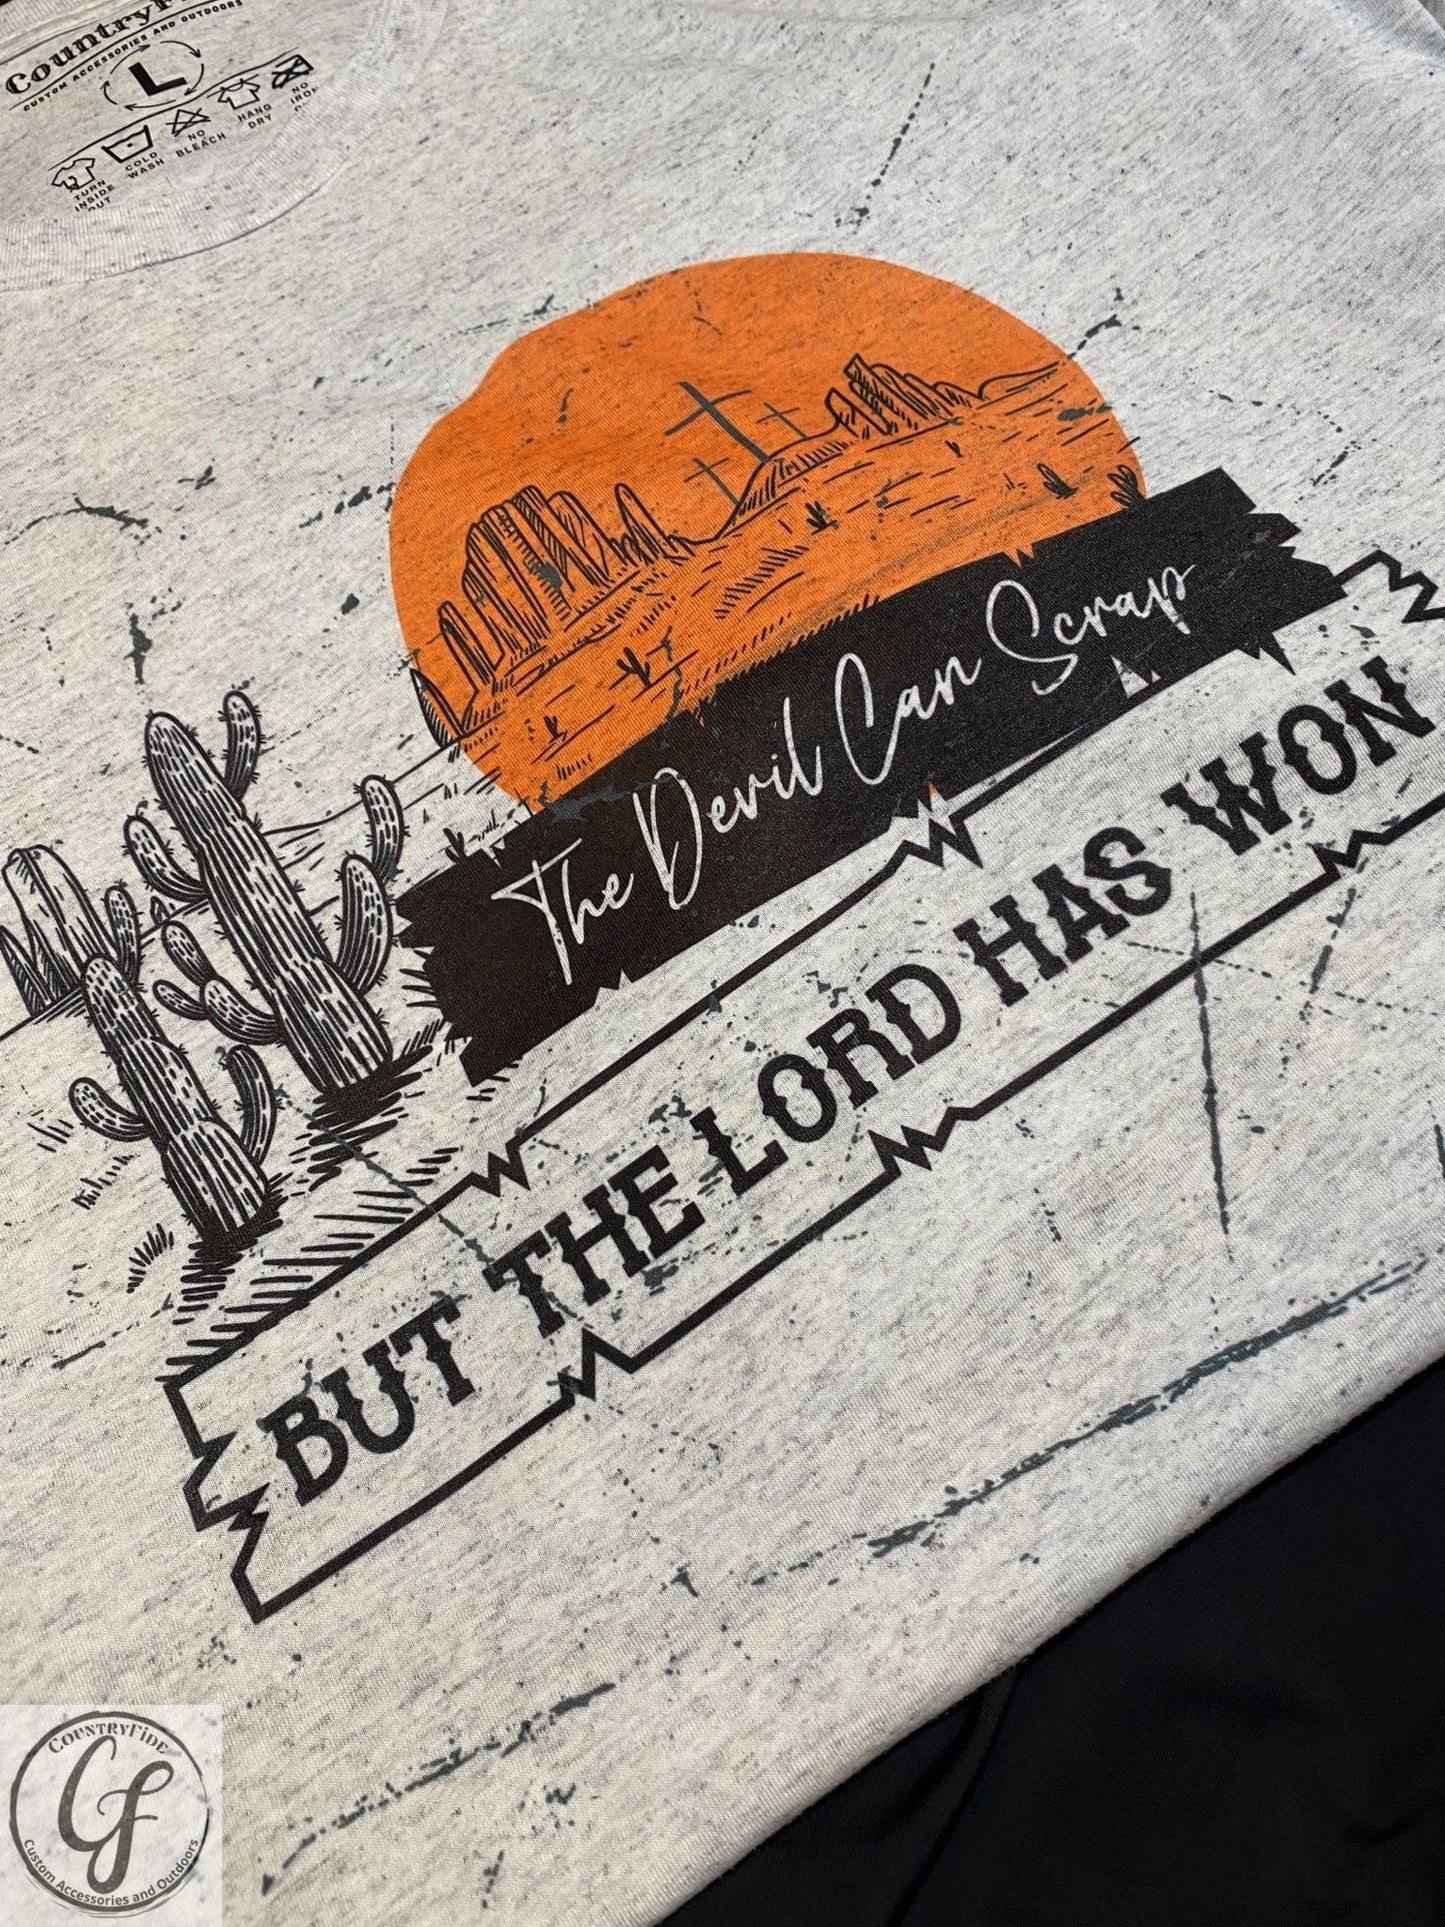 THE LORD HAS WON - CountryFide Custom Accessories and Outdoors